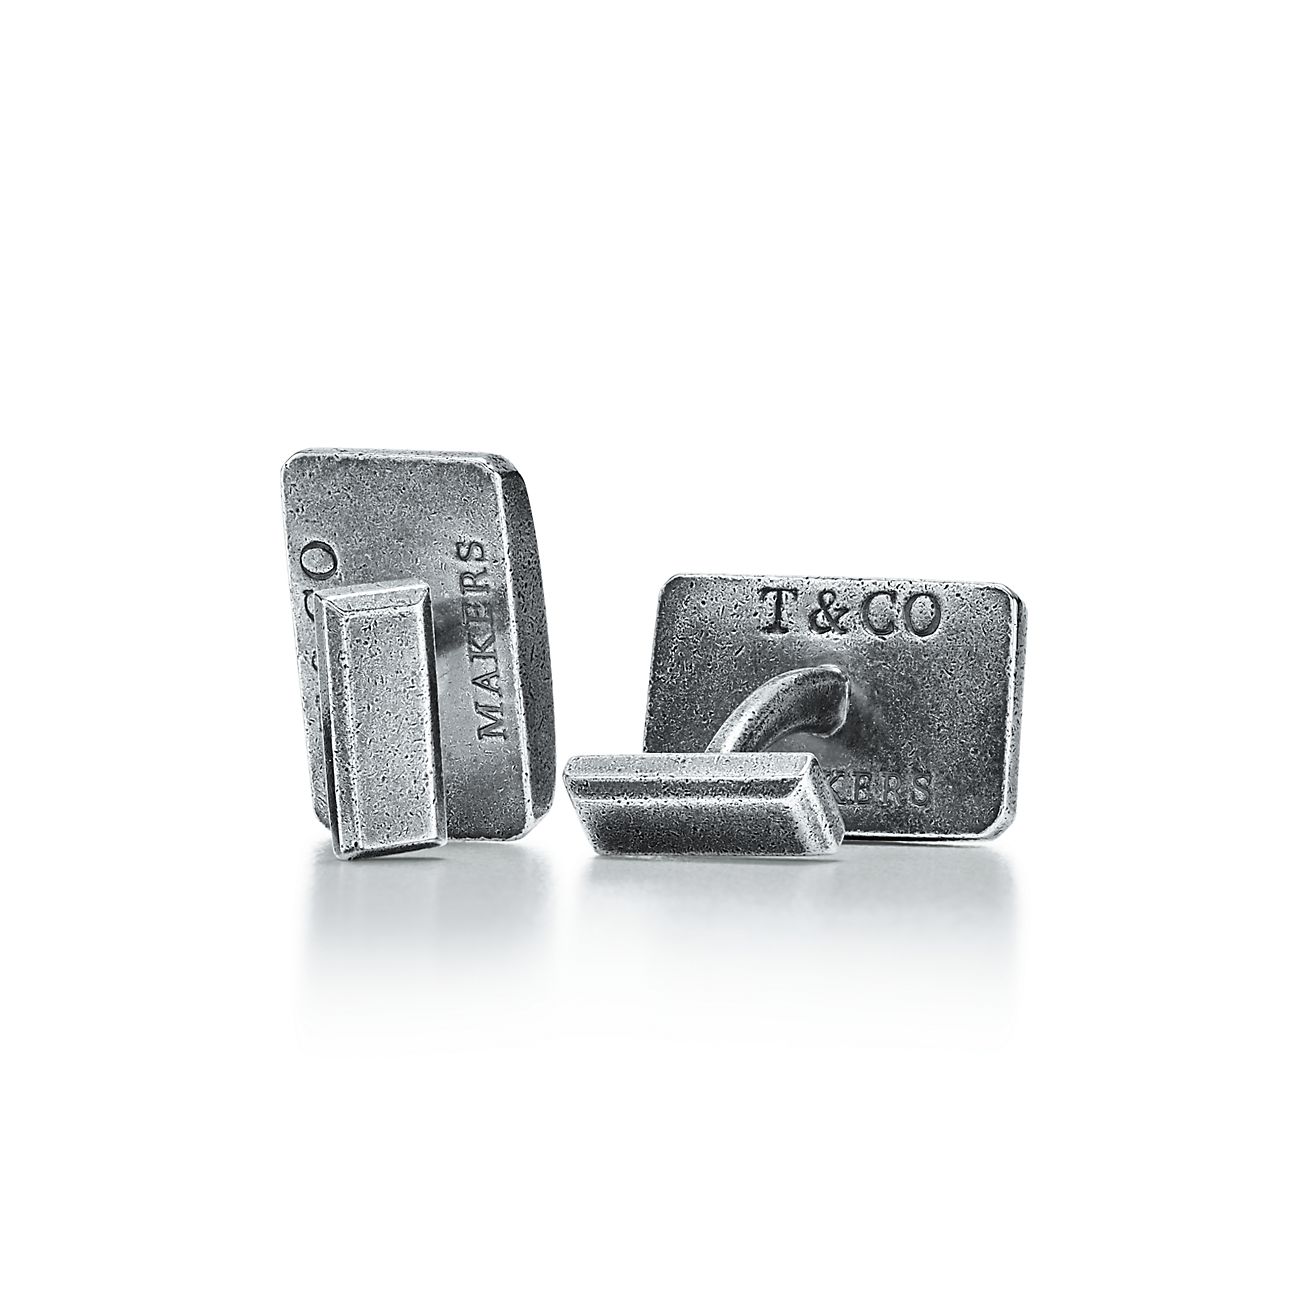 Tiffany 1837® Makers Tumbled Rectangle Cuff Links in Sterling Silver